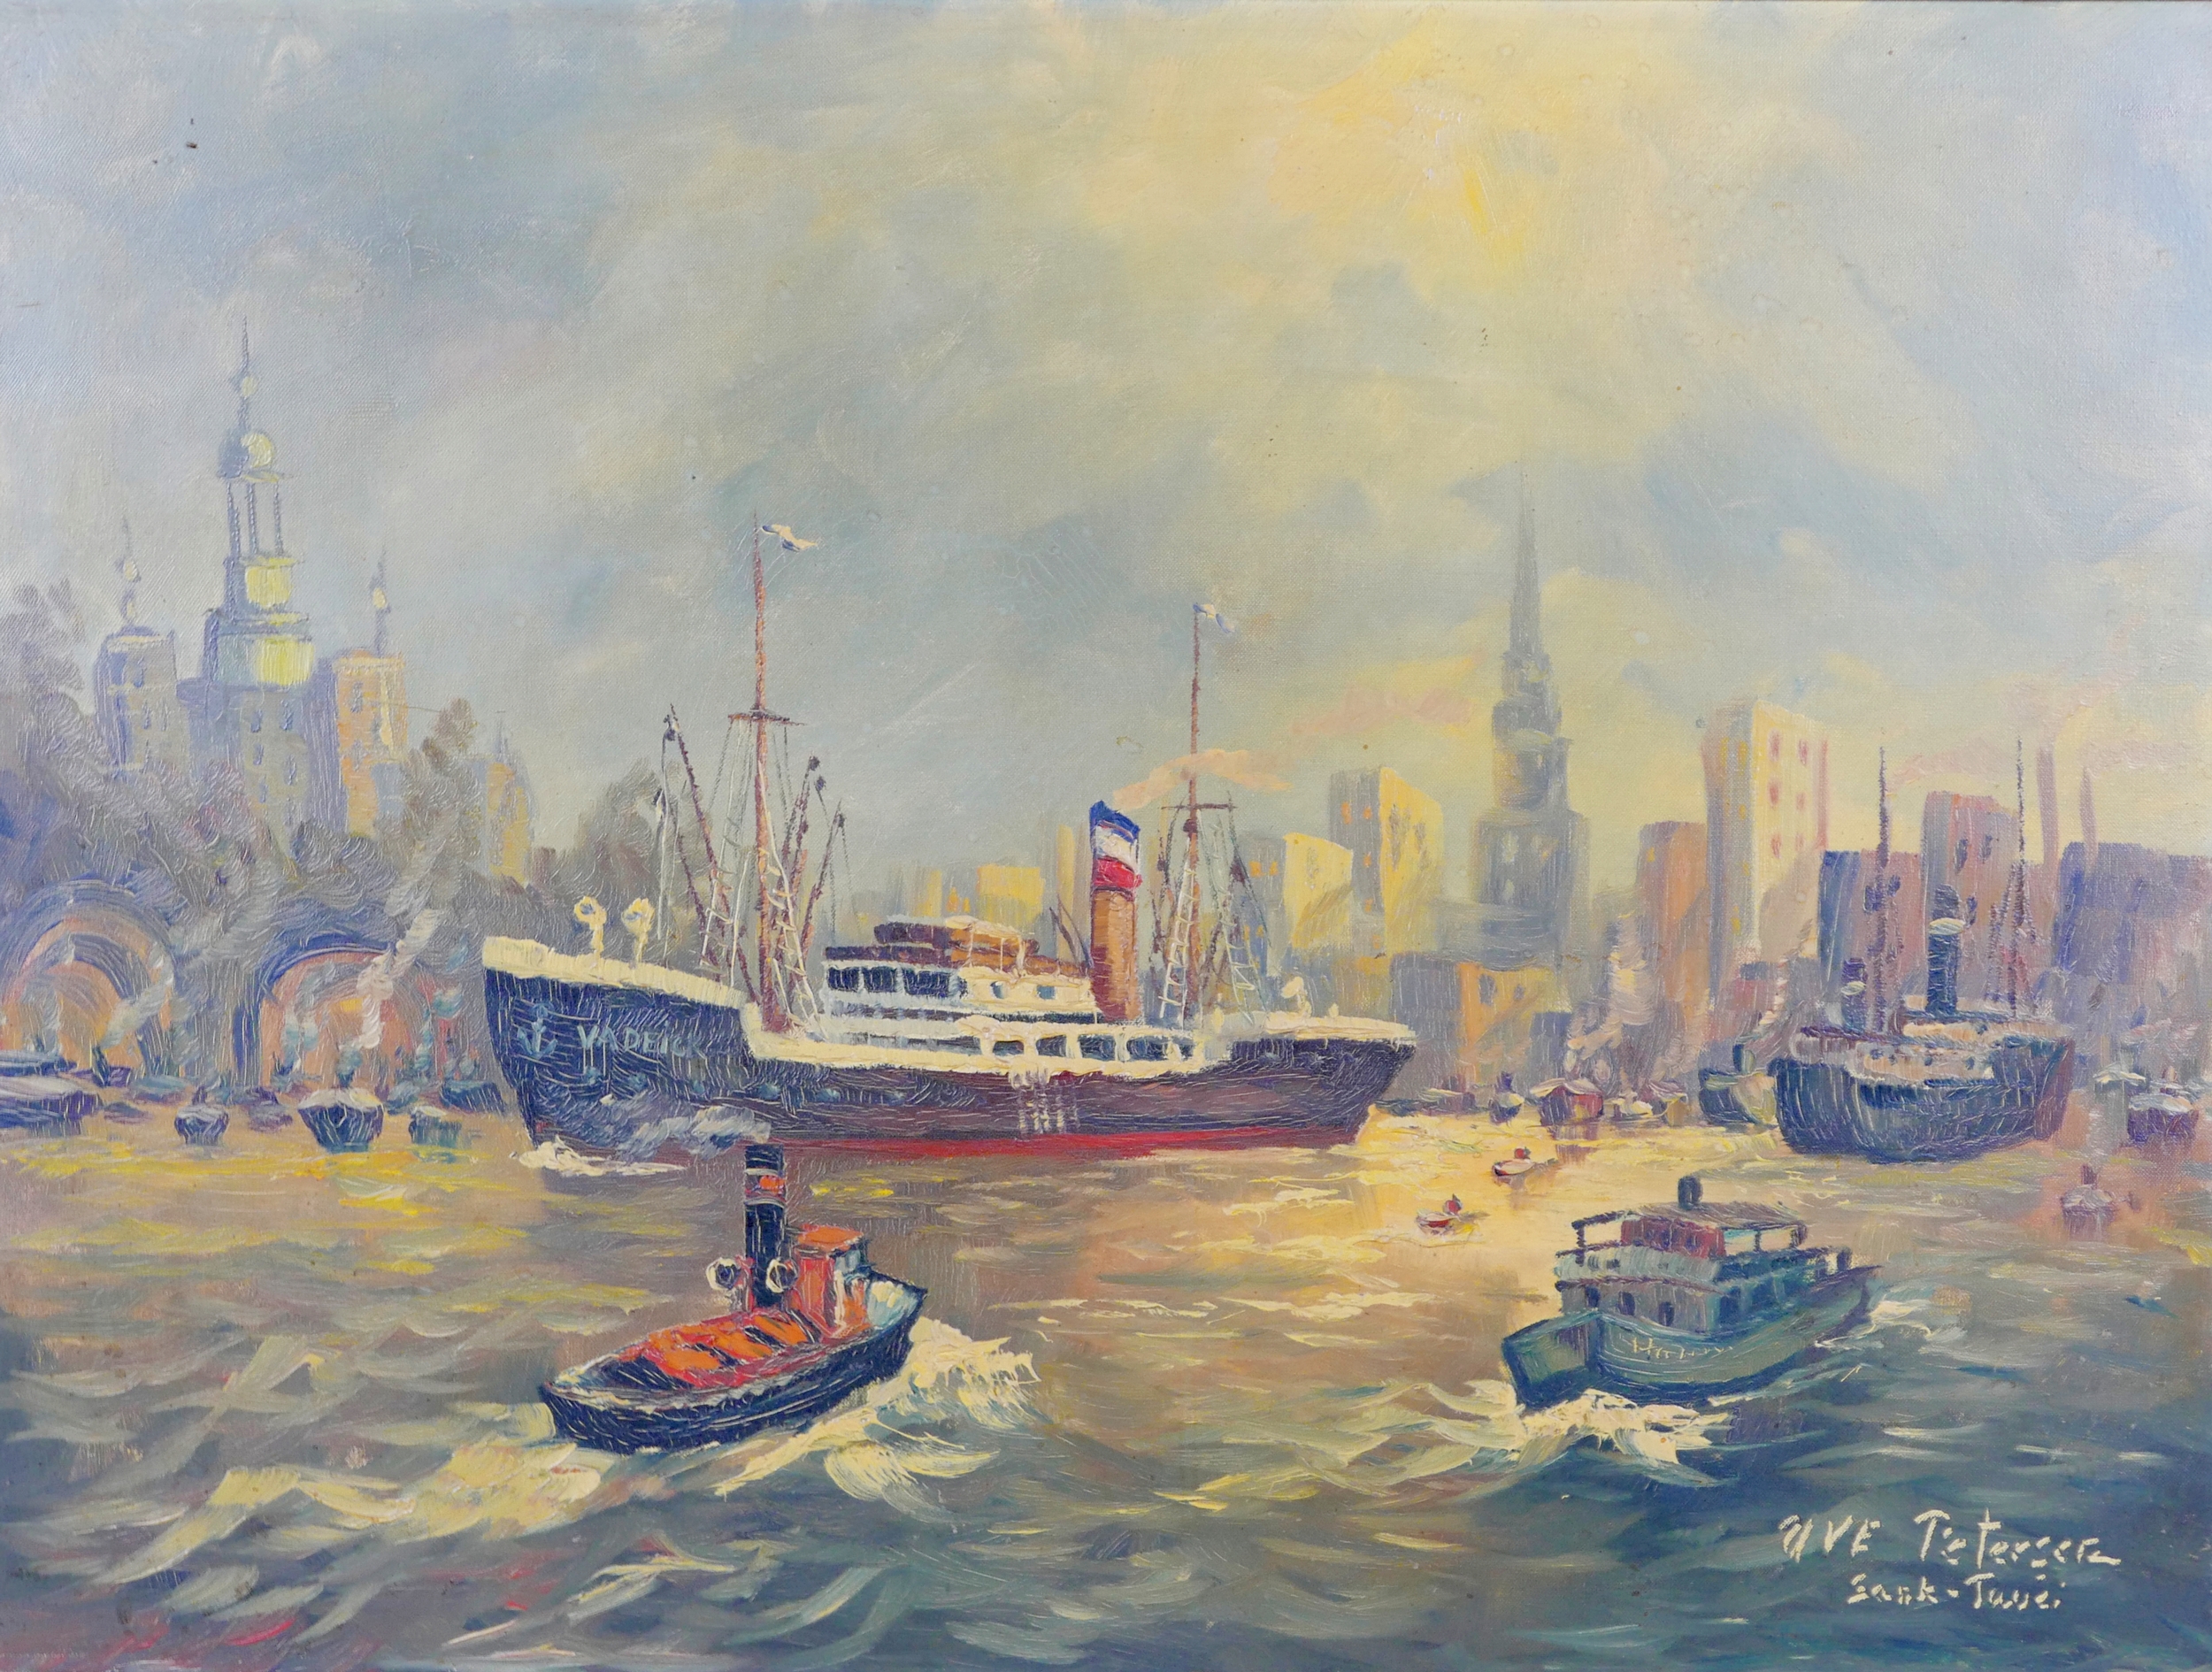 Uve Petersen (20th century): 'Hamburg', a view of the harbour with the steamship 'Vadeik' to the